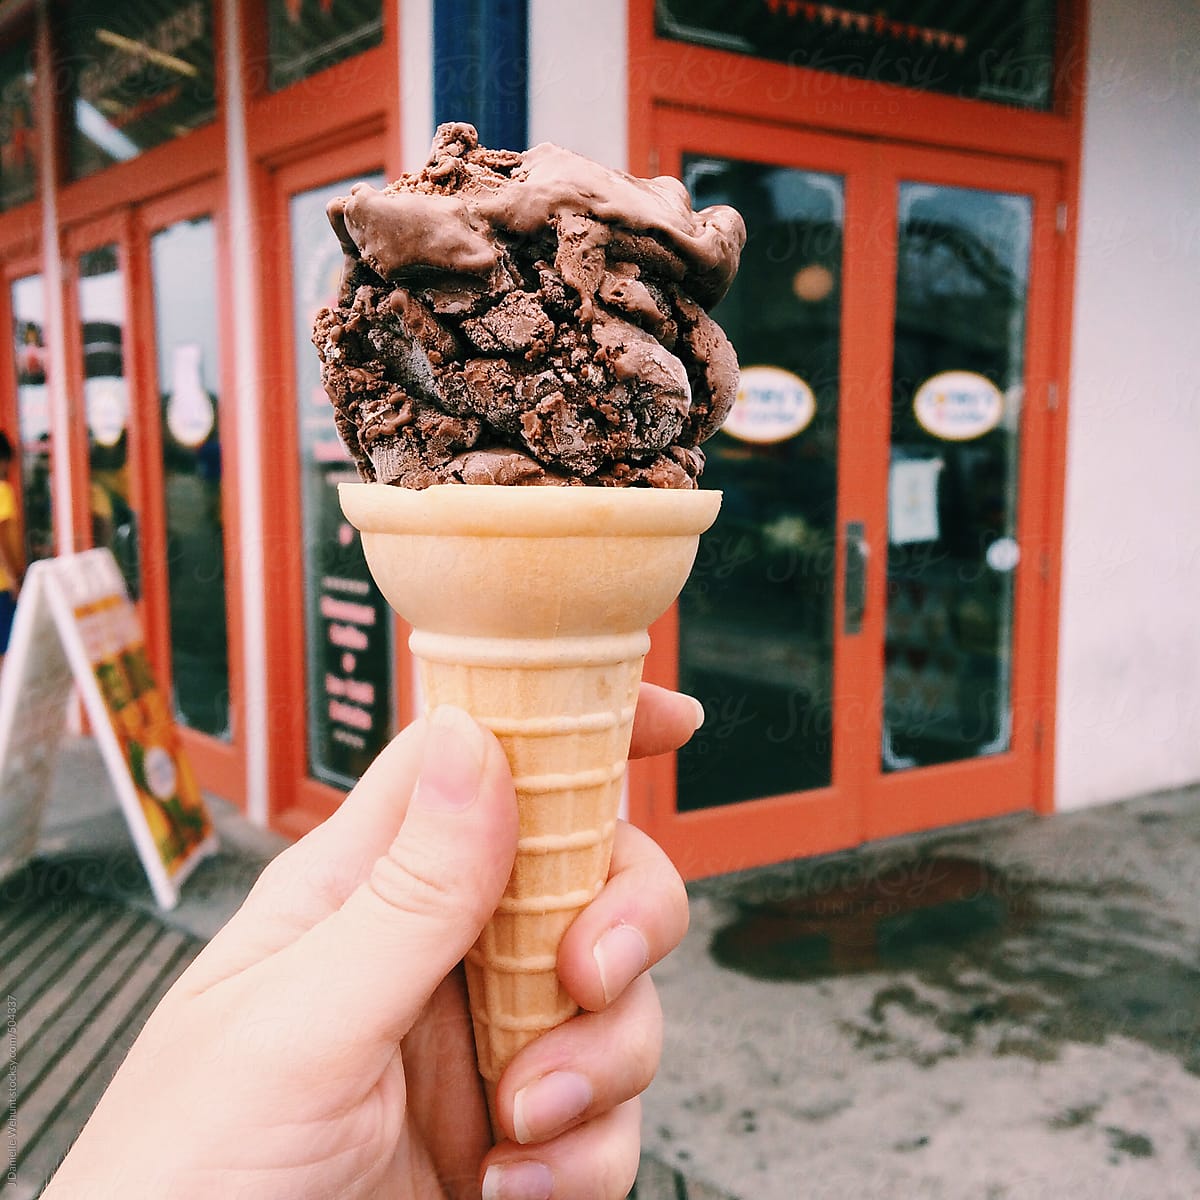 mildly melted chocolate ice cream cone being held by hand in front of store